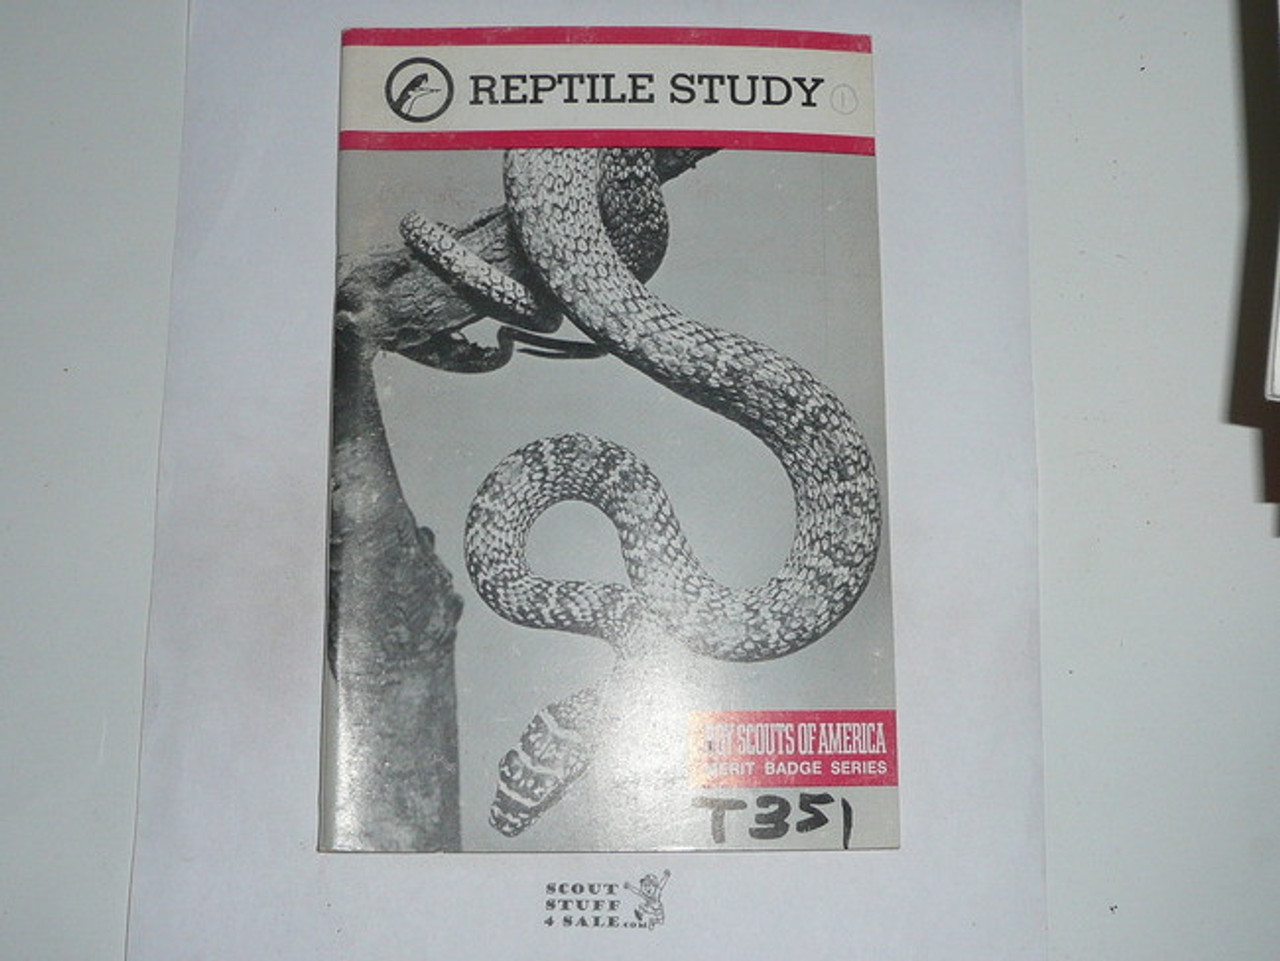 Reptile Study Merit Badge Pamphlet, Type 9, Red Band Cover, 4-81 Printing